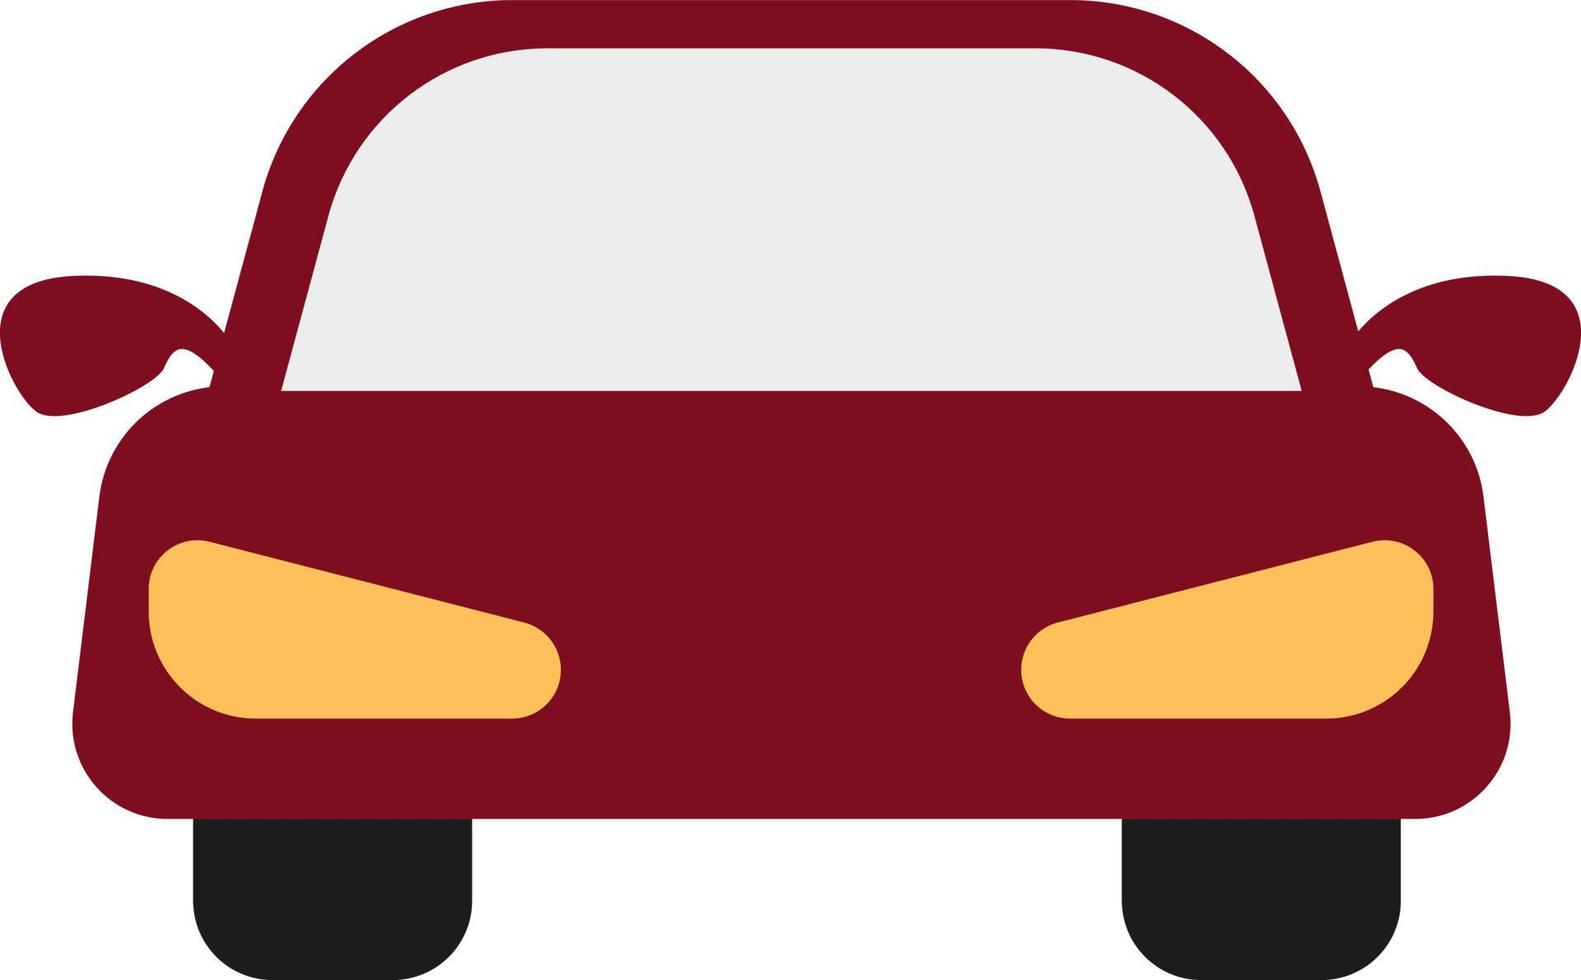 Red car, illustration, vector on a white background